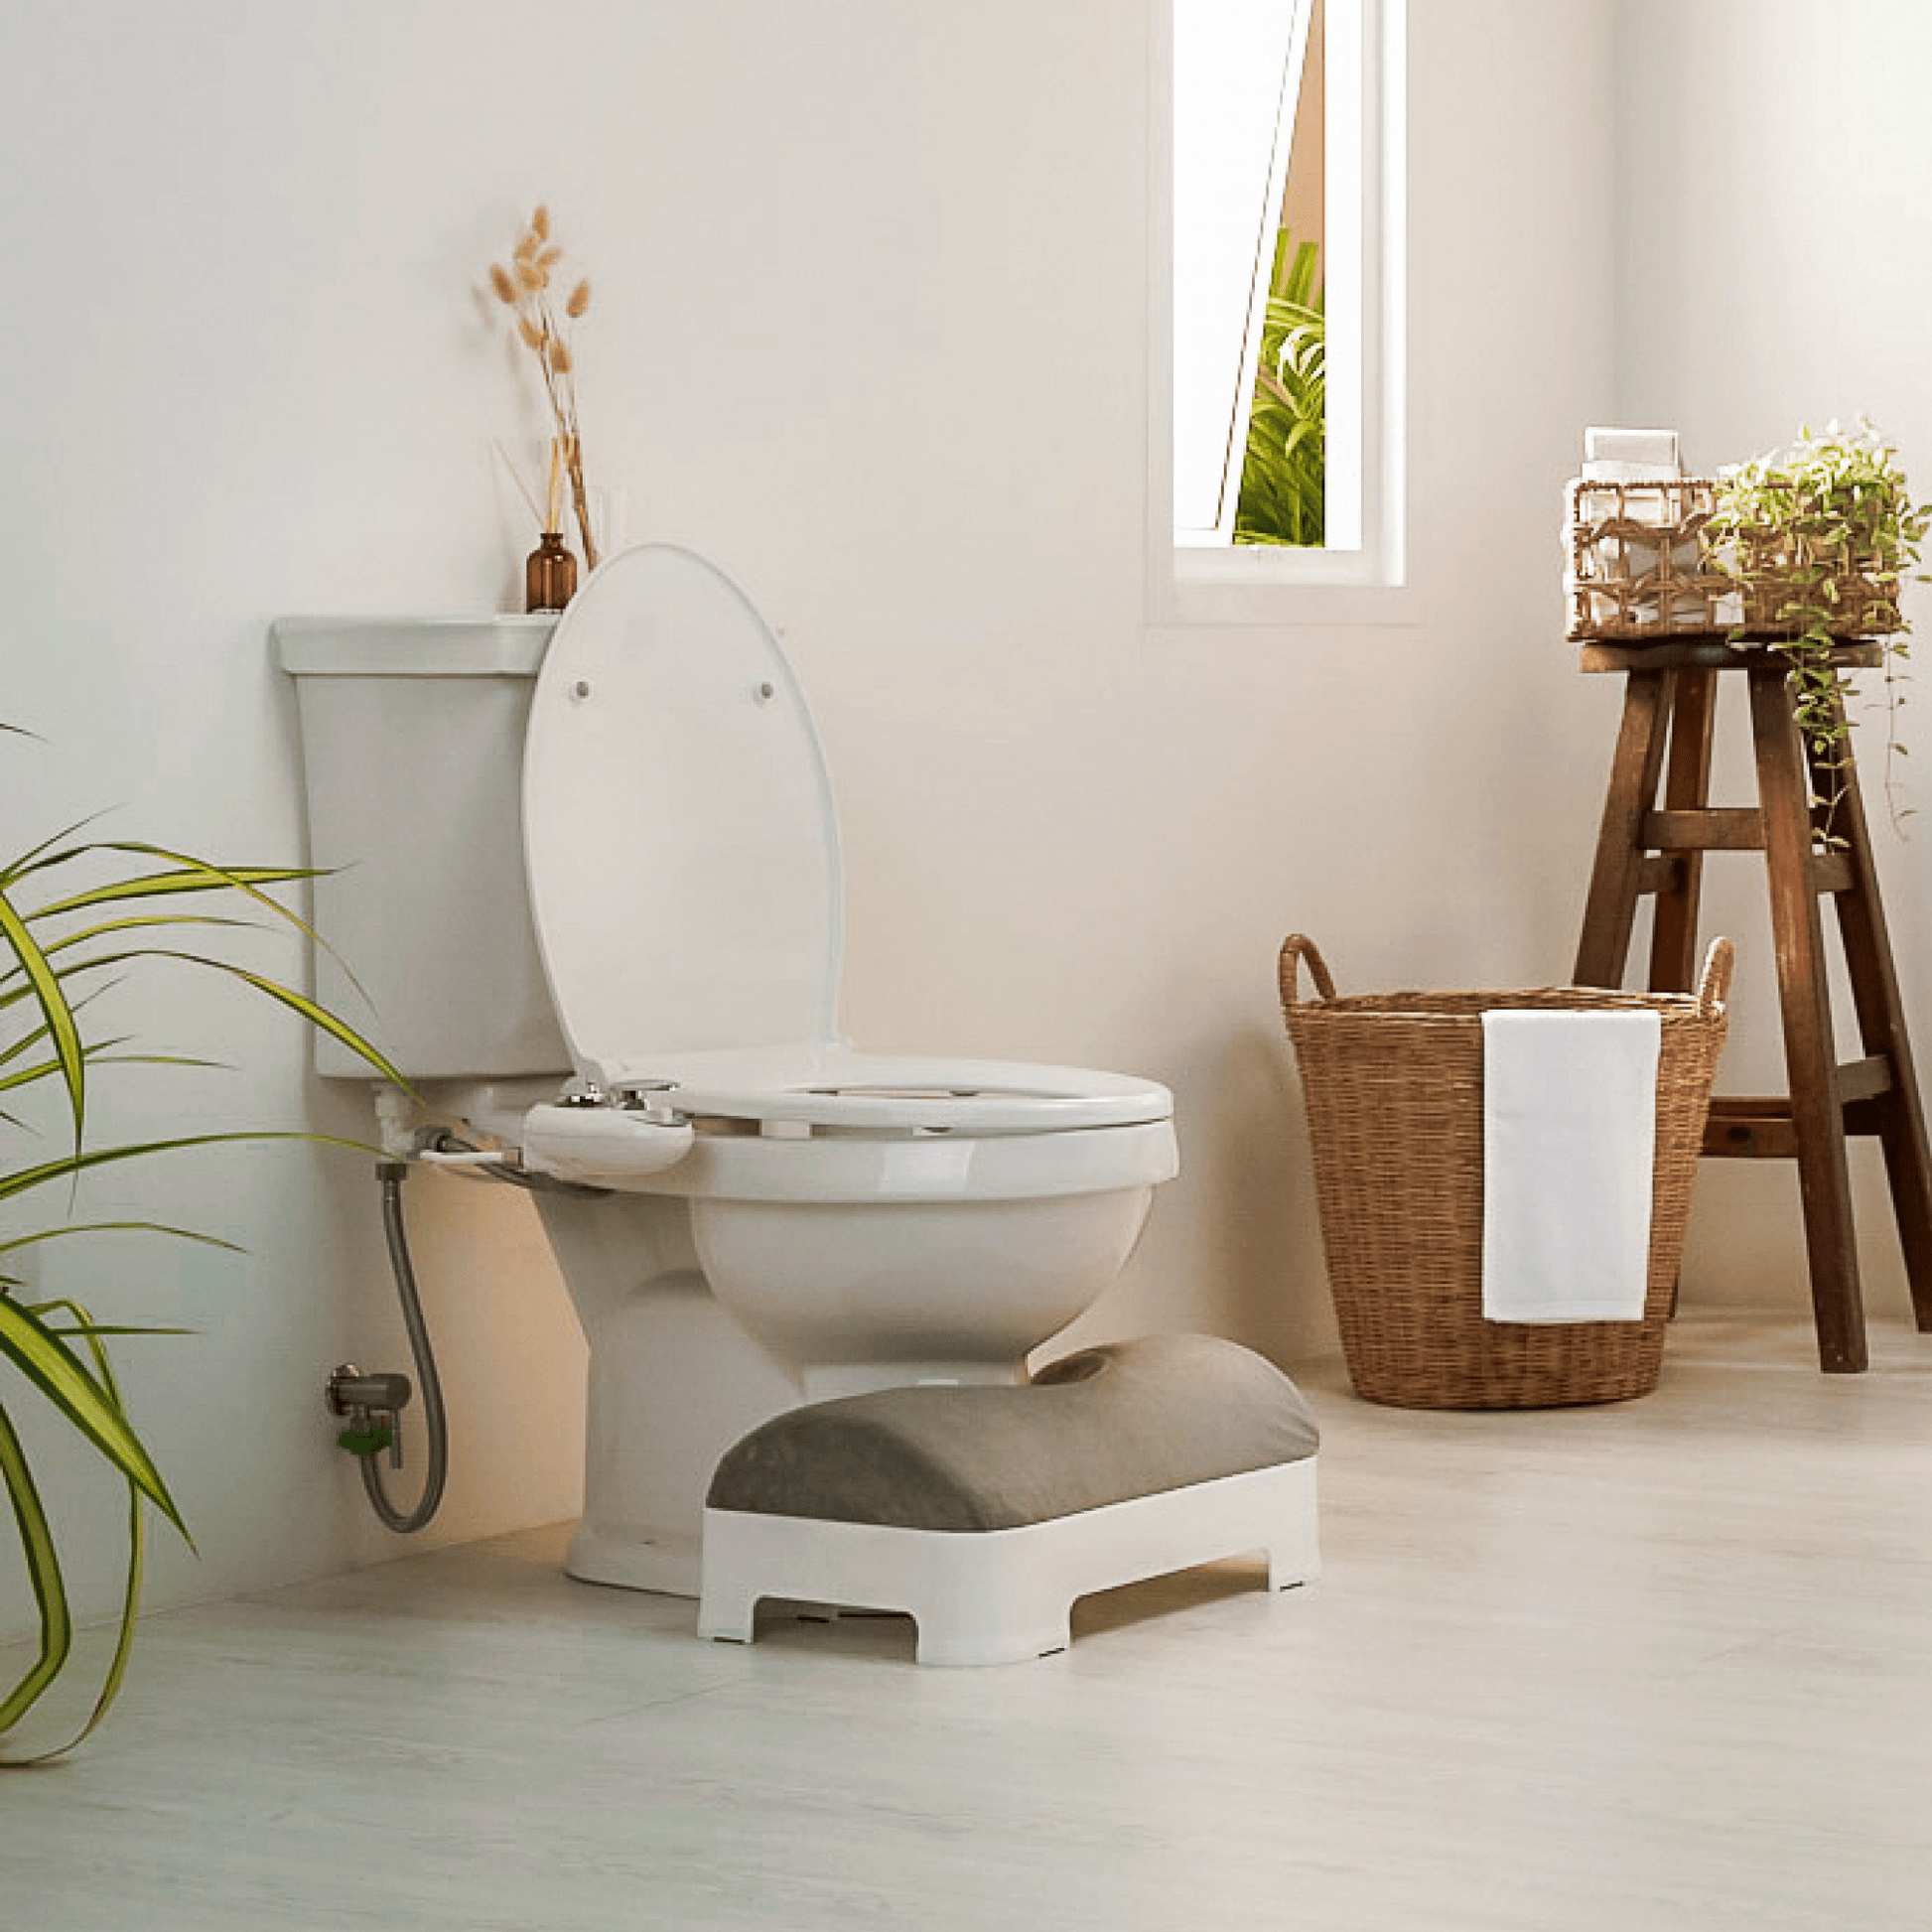 LUXE Footstool: Velour Covers - Gray - Footstool is tucked into toilet in a modern bathroom